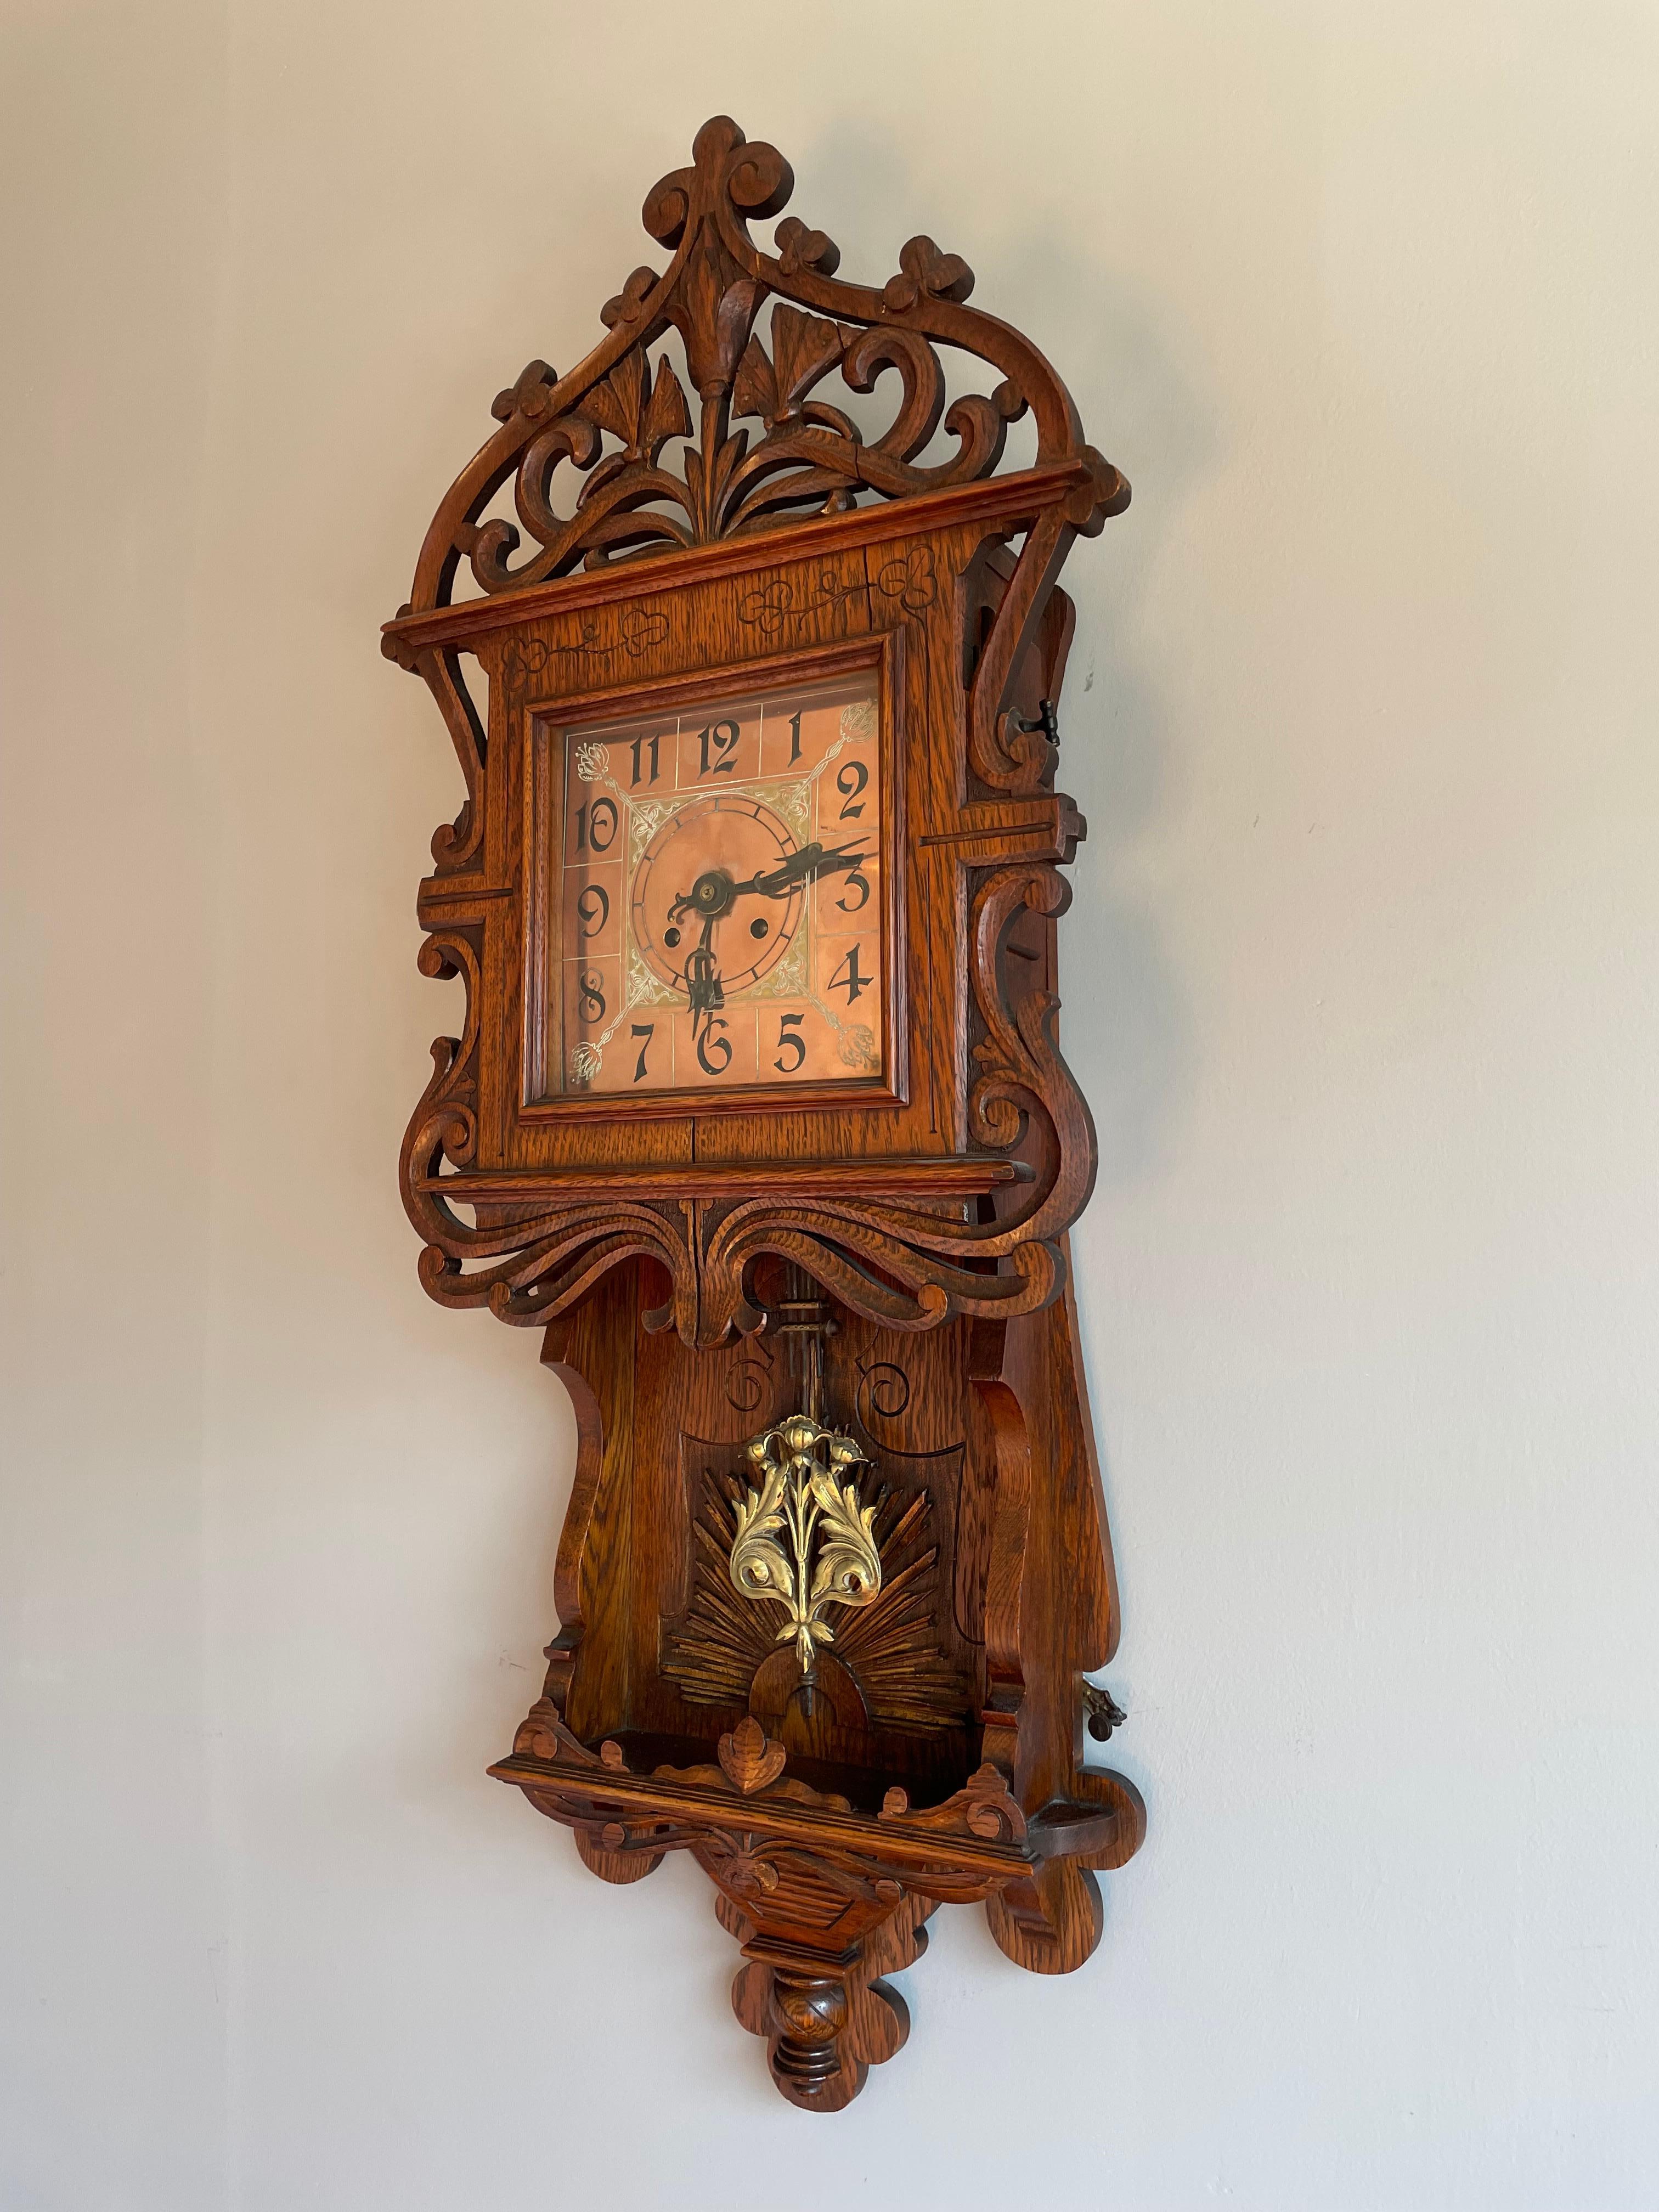 Stunning clock for the collectors of rare and truly stylish Gothic antiques.

Gothic wall clocks are a rare find and this quality carved specimen, in our view, has the perfect size and design to use and enjoy in any Gothic (inspired) interior. All